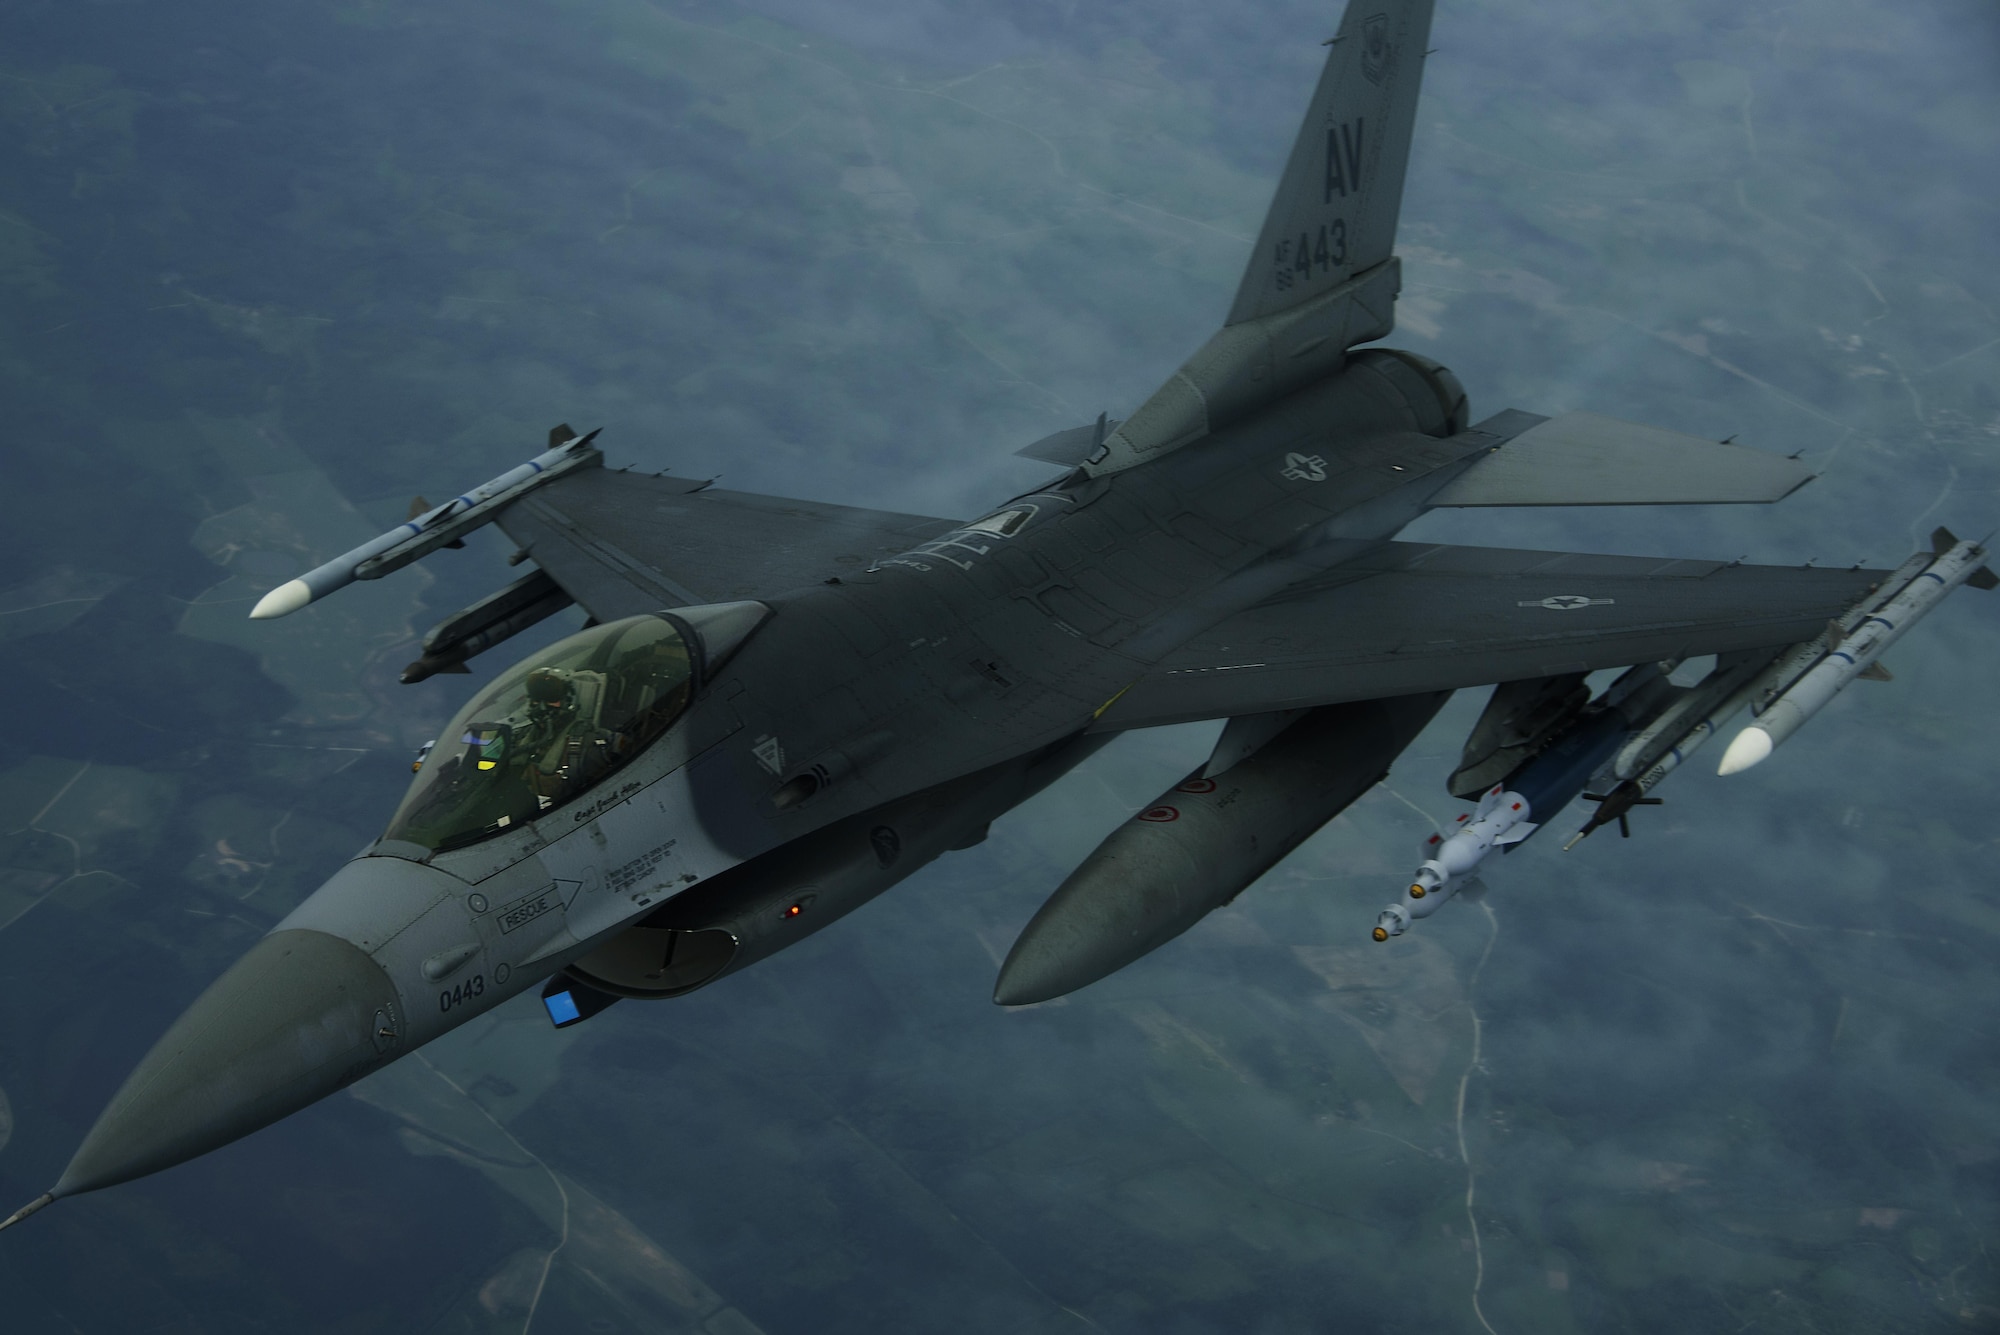 An F-16 Fighting Falcon, 510th Fighter Squadron, is deployed to Krzesiny Air Base, Poland, in support of Aviation
Detachment rotation 17-3, exercise BALTOPS and exercise Saber Strike flies over Latvia, June 7, 2017. The exercise, is designed to enhance flexibility and interoperability, to strengthen combined response capabilities, as well as demonstrate resolve among Allied and Partner Nations' forces to ensure stability in, and if necessary defend, the Baltic Sea region. (U.S. Air Force photo by Staff Sgt. Jonathan Snyder)